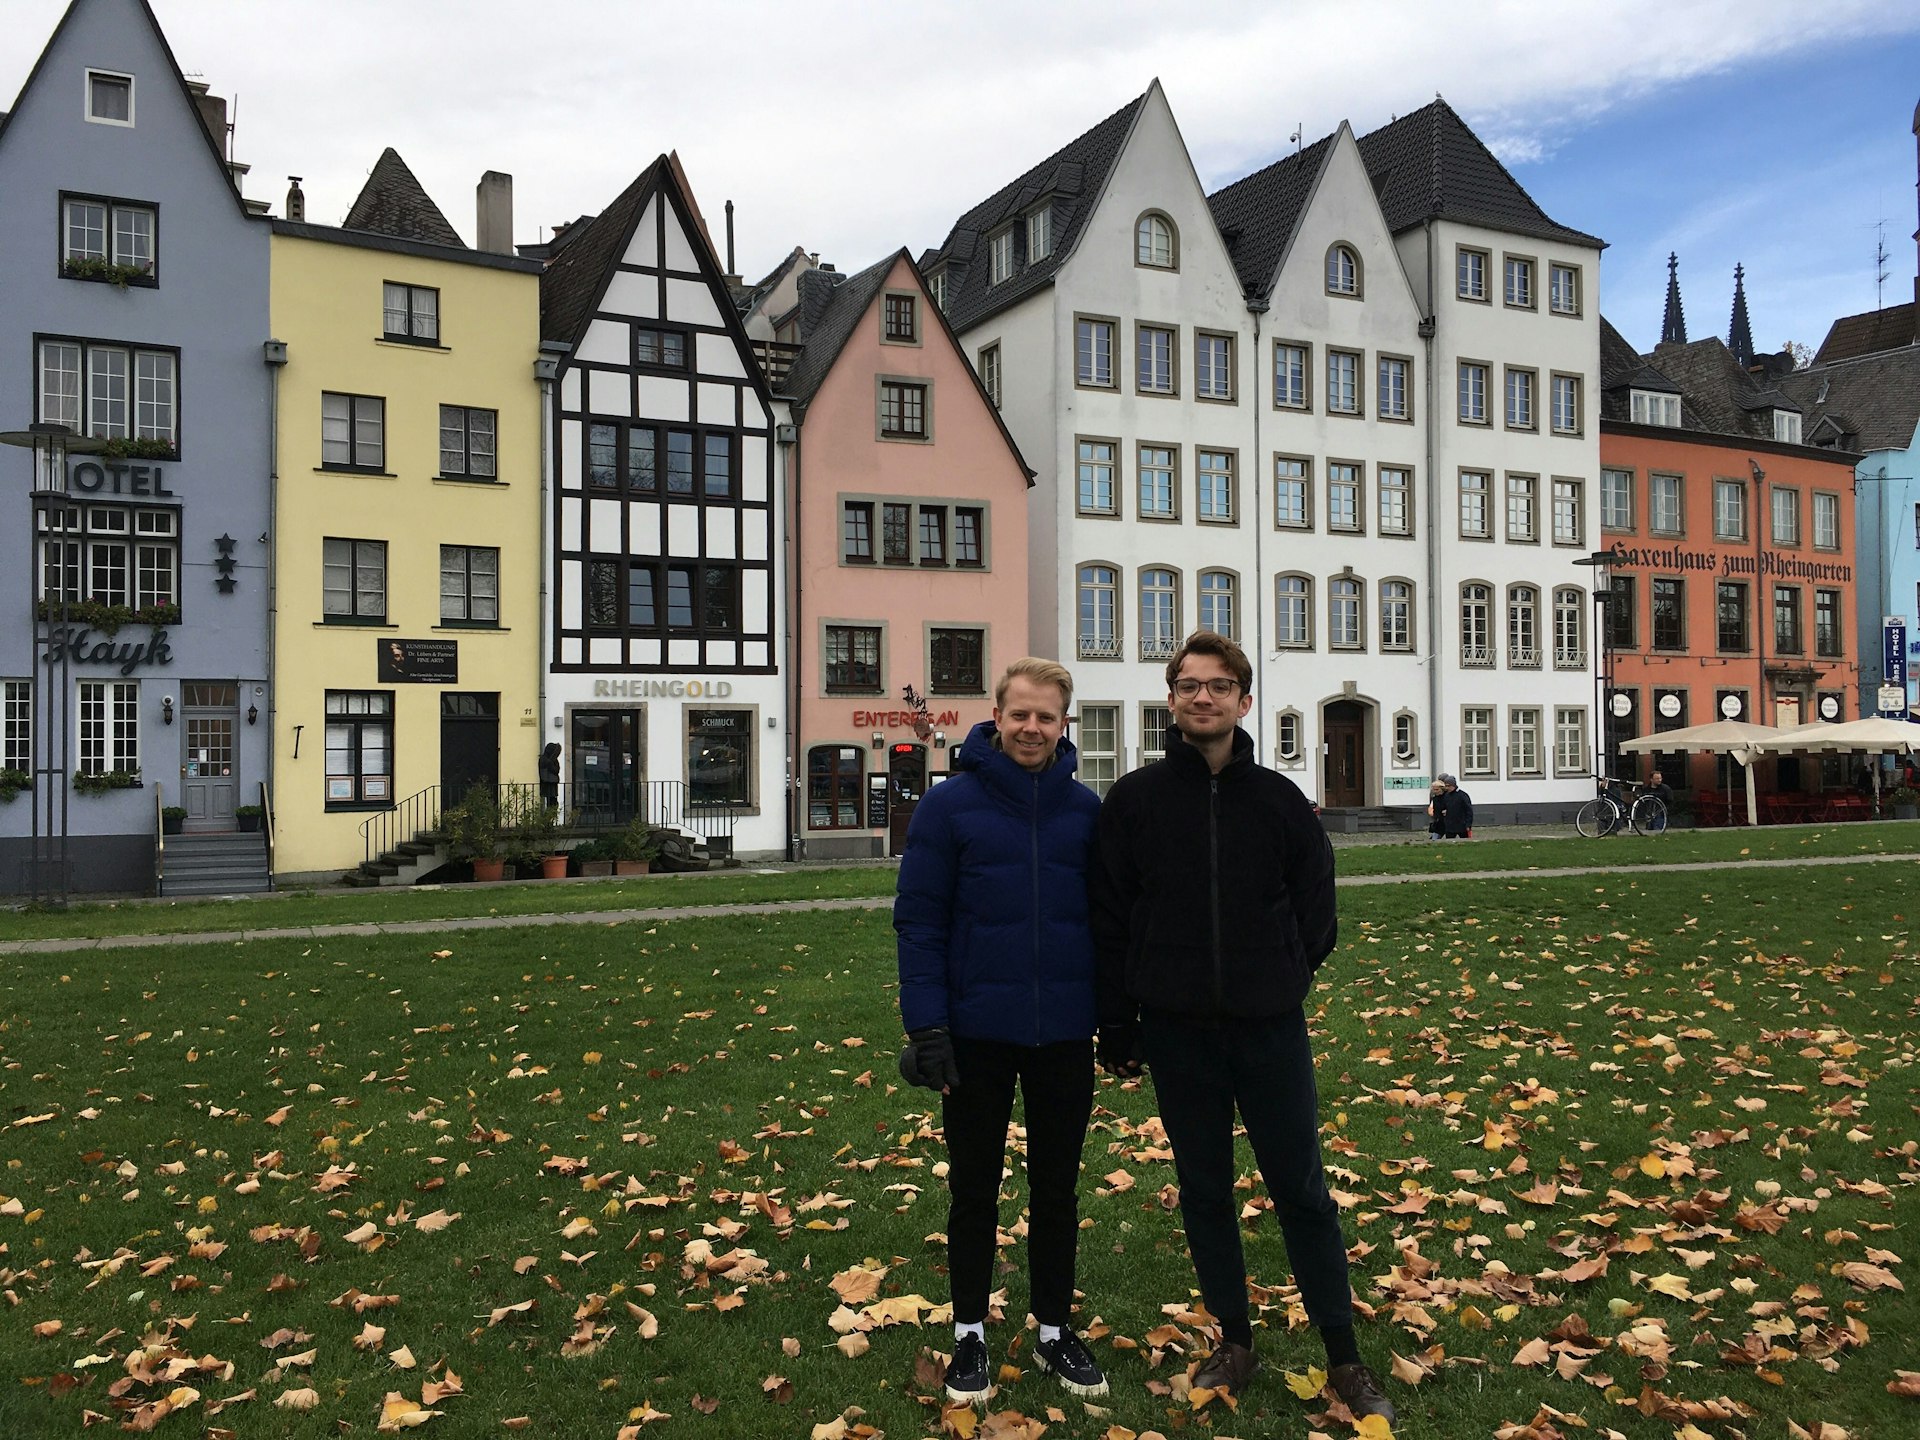 Two men stand on grass. In the background are typical narrow German buildings.